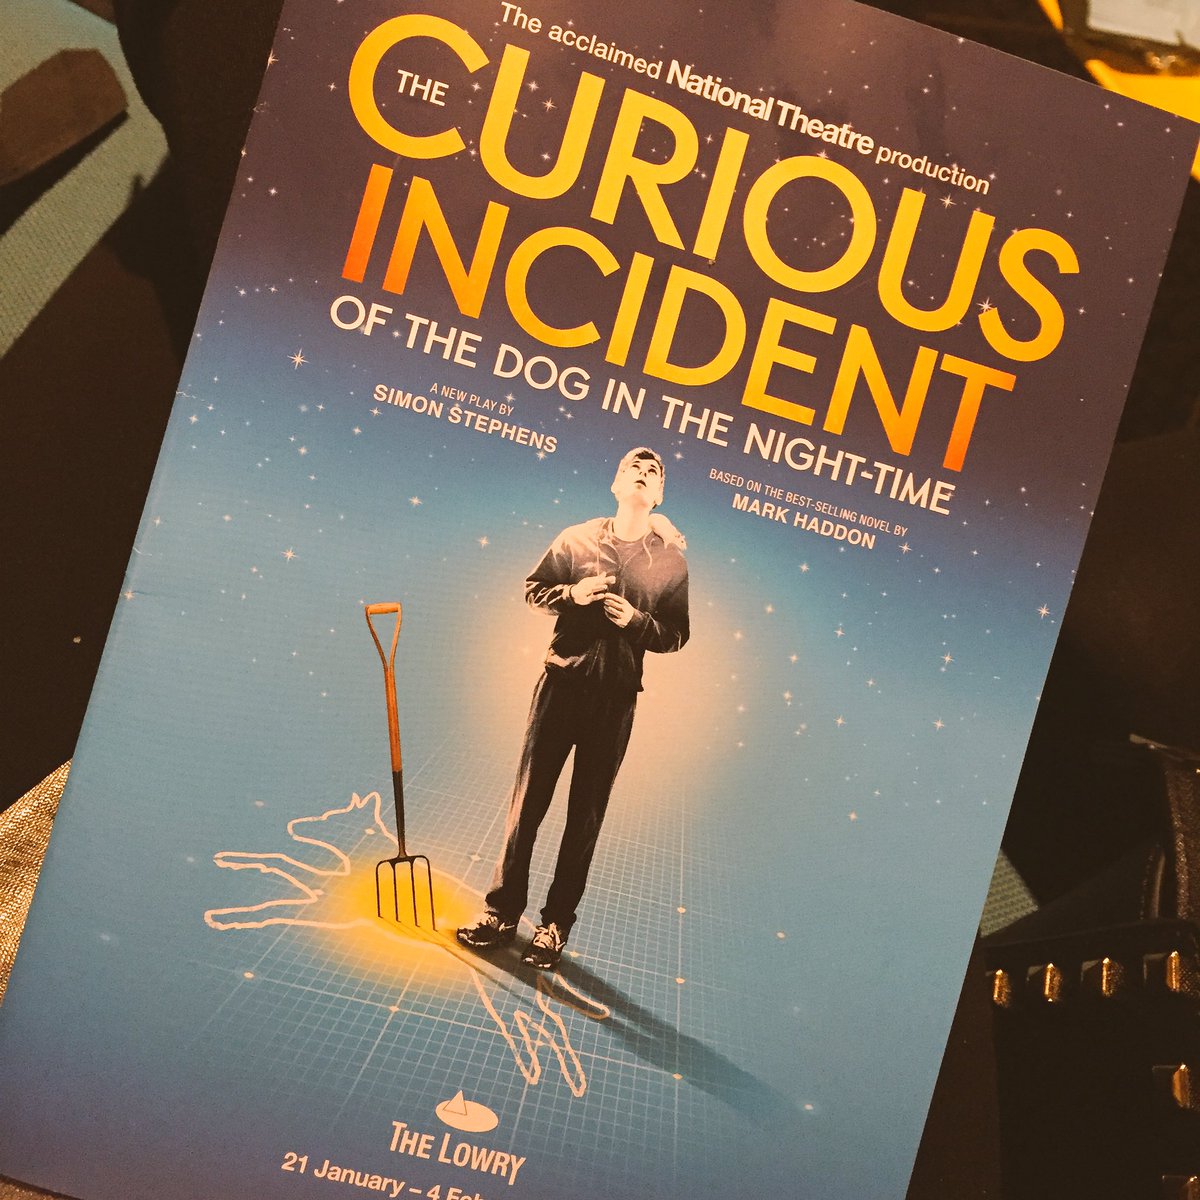 At @The_Lowry getting ready to watch #TheCuriousIncident ????????❤ https://t.co/x2HGlli4j9